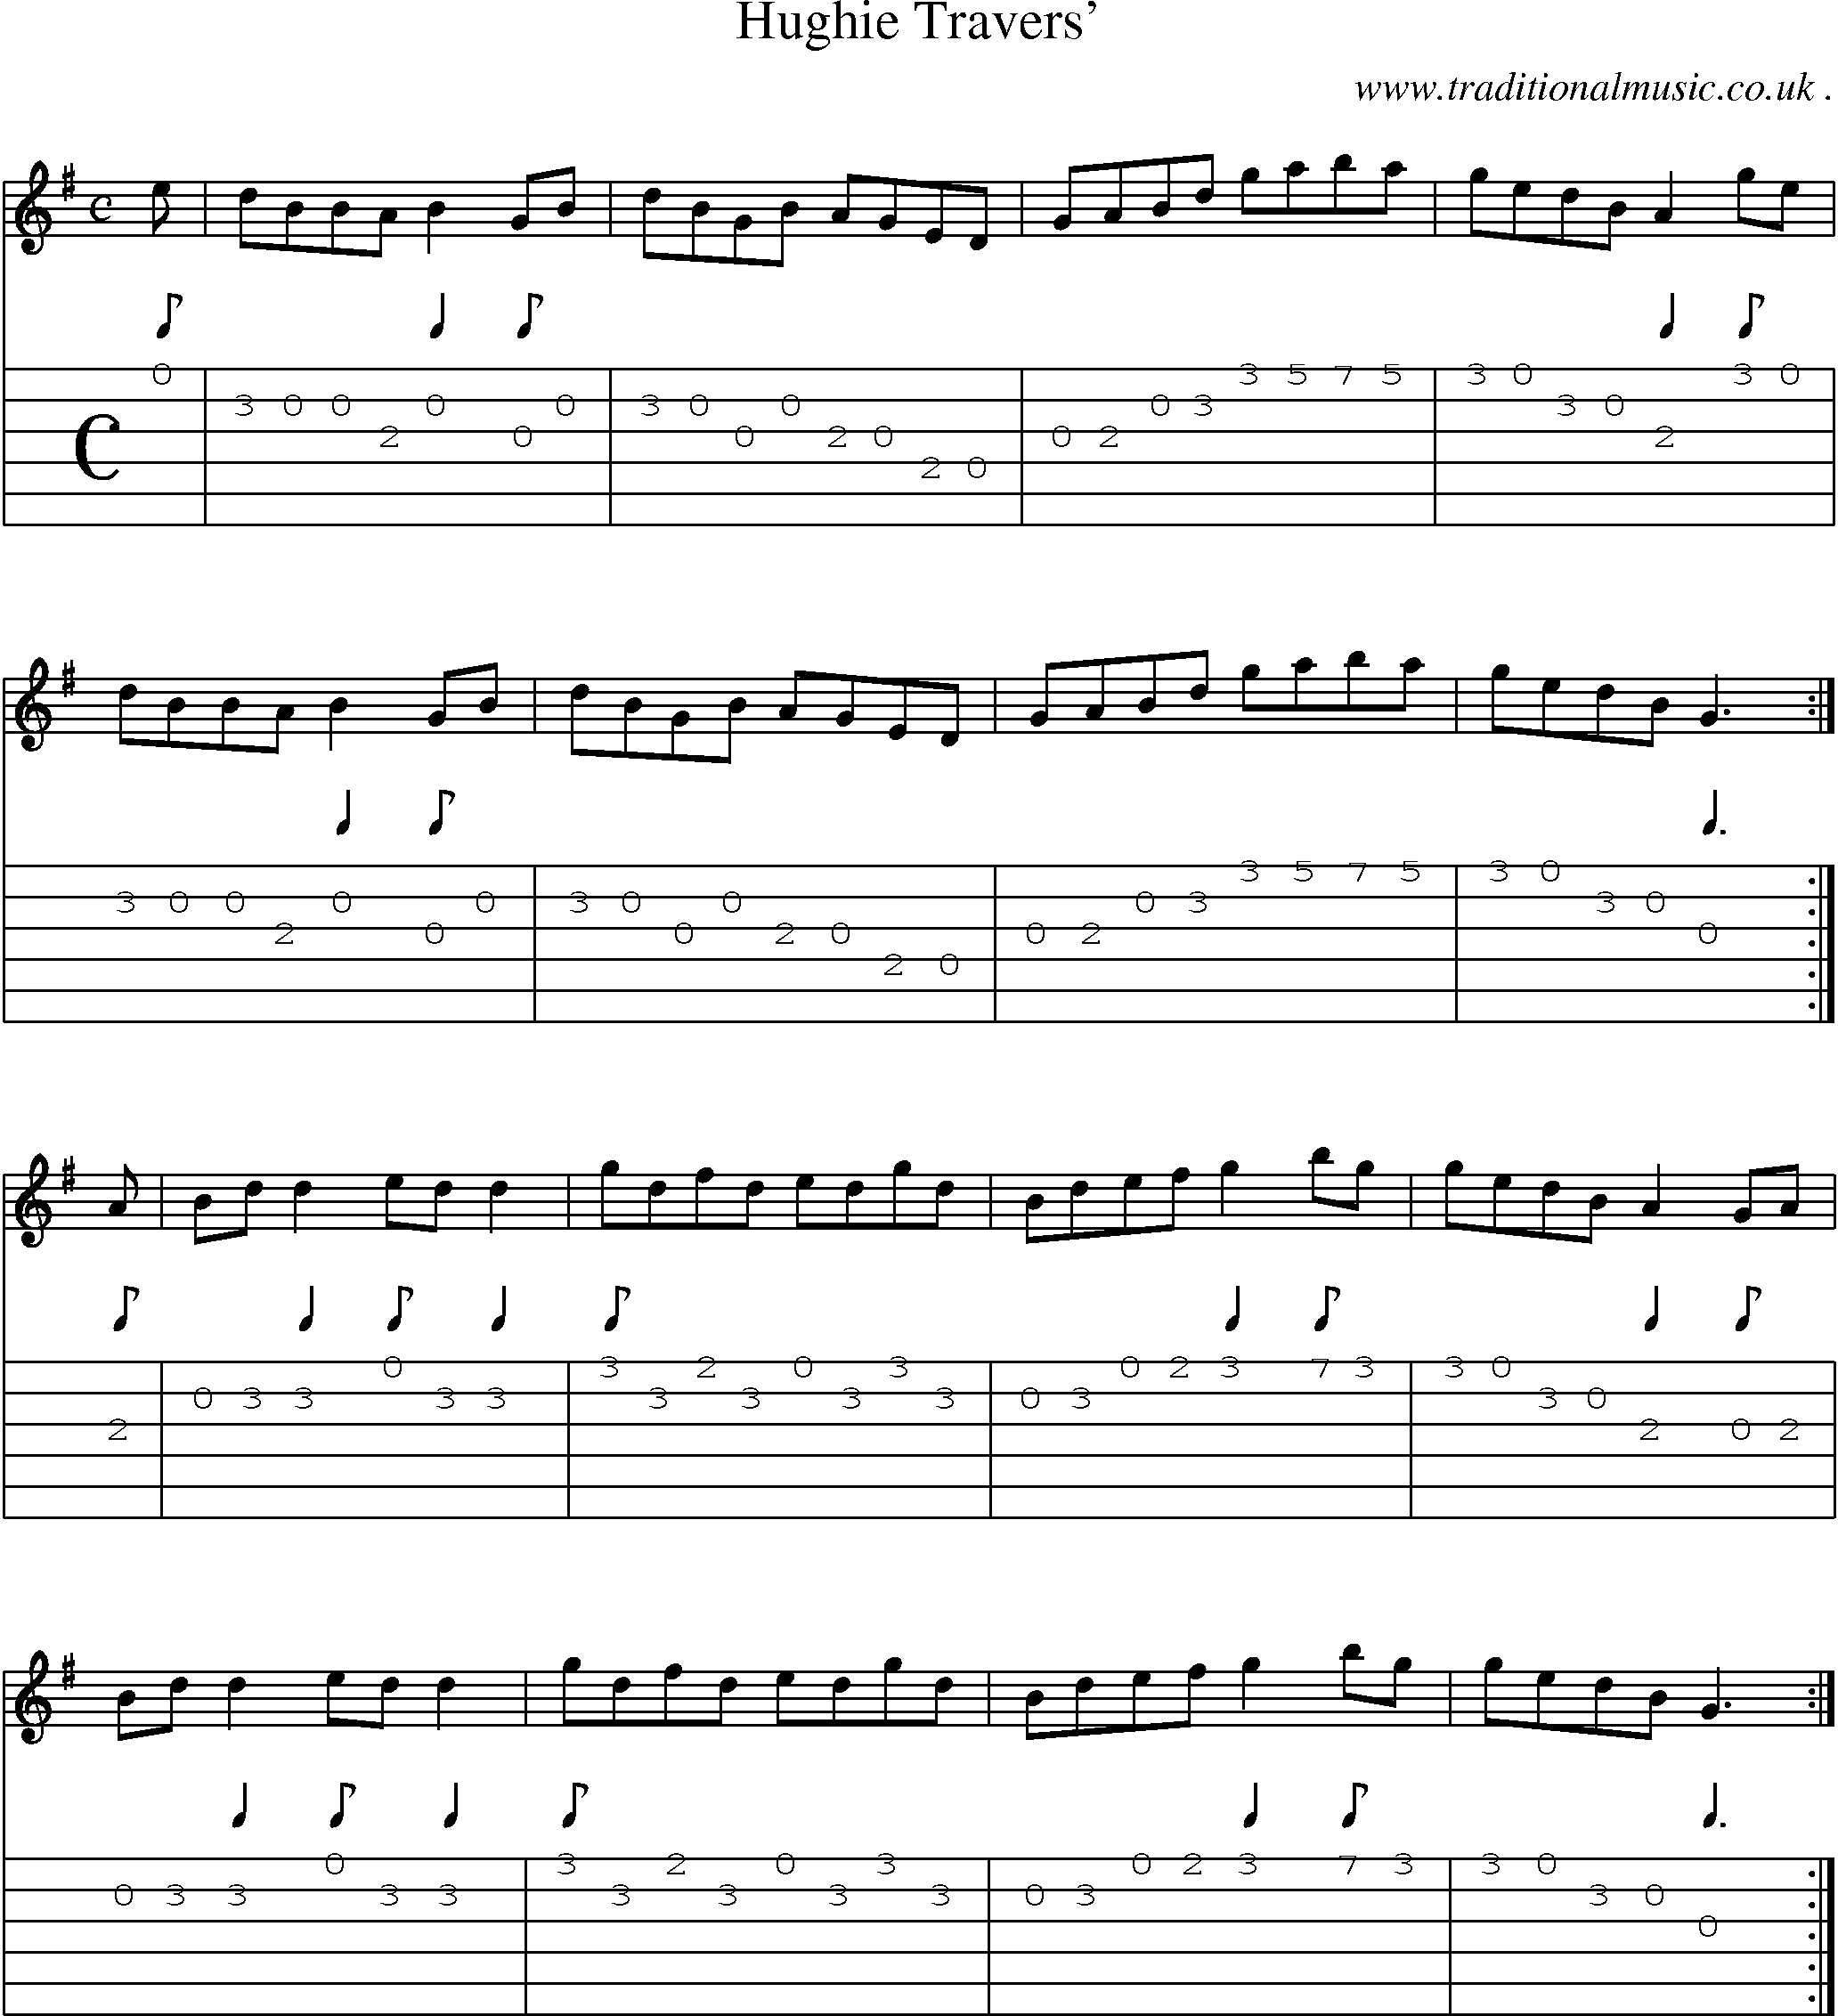 Sheet-Music and Guitar Tabs for Hughie Travers